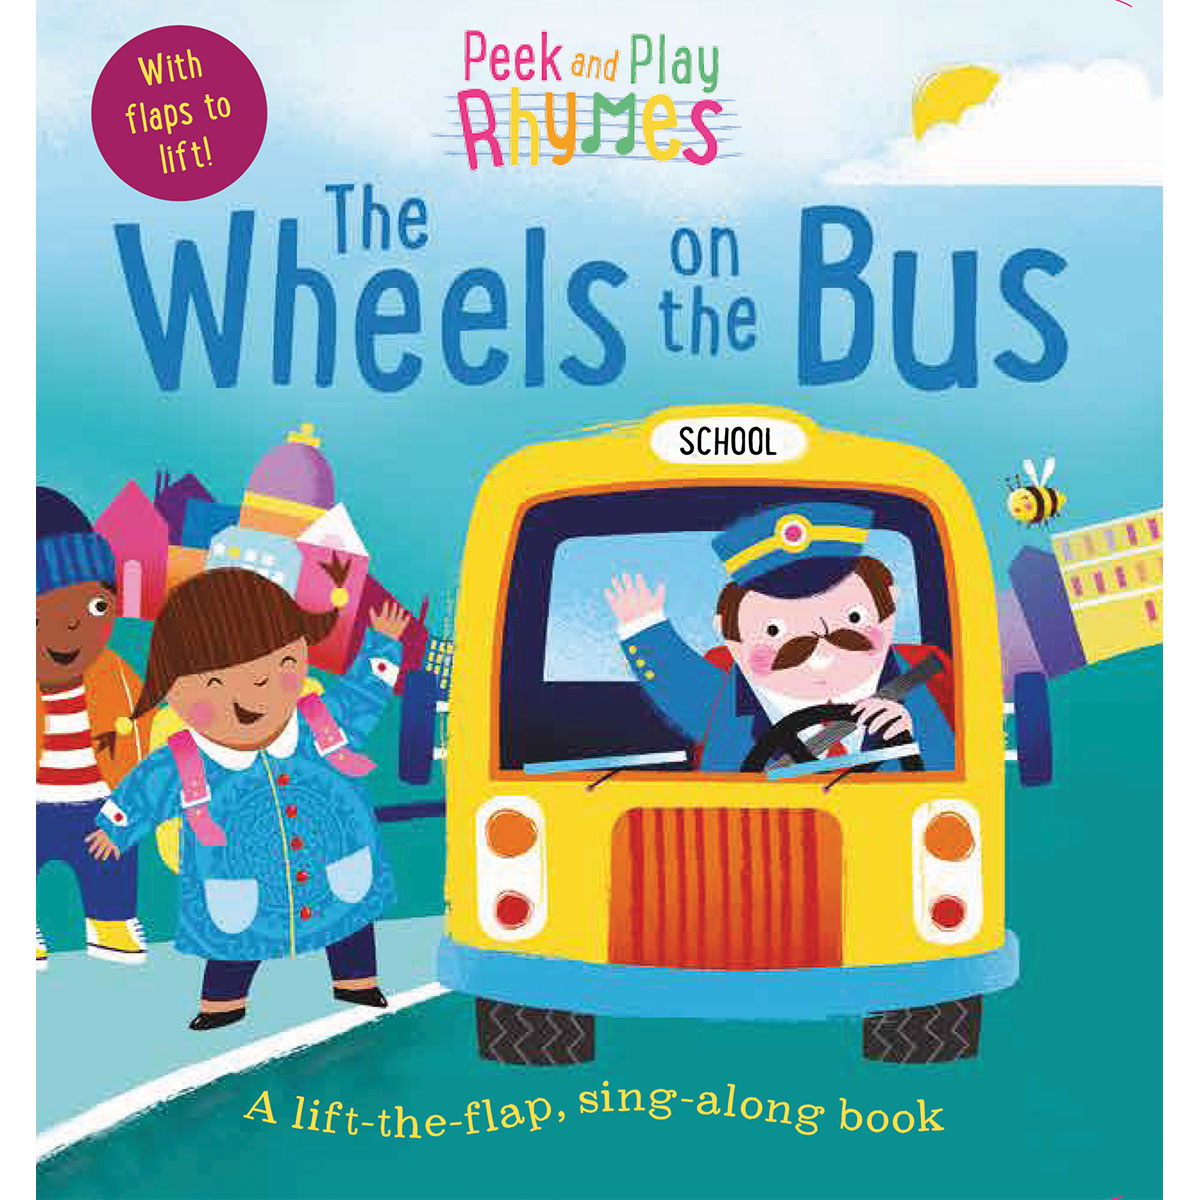 Peek and Play Rhymes: The Wheels on the Bus